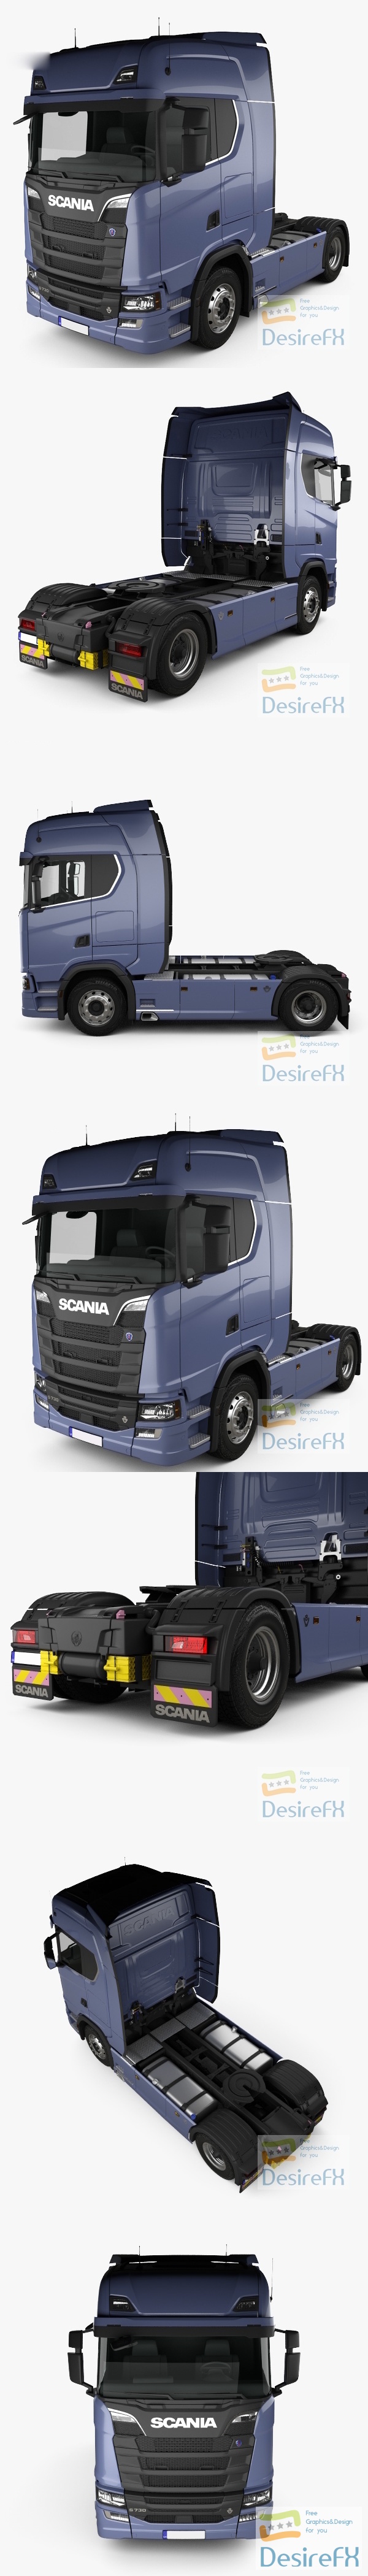 Scania S 730 Highline Tractor Truck 2-axle 2016 3D Model